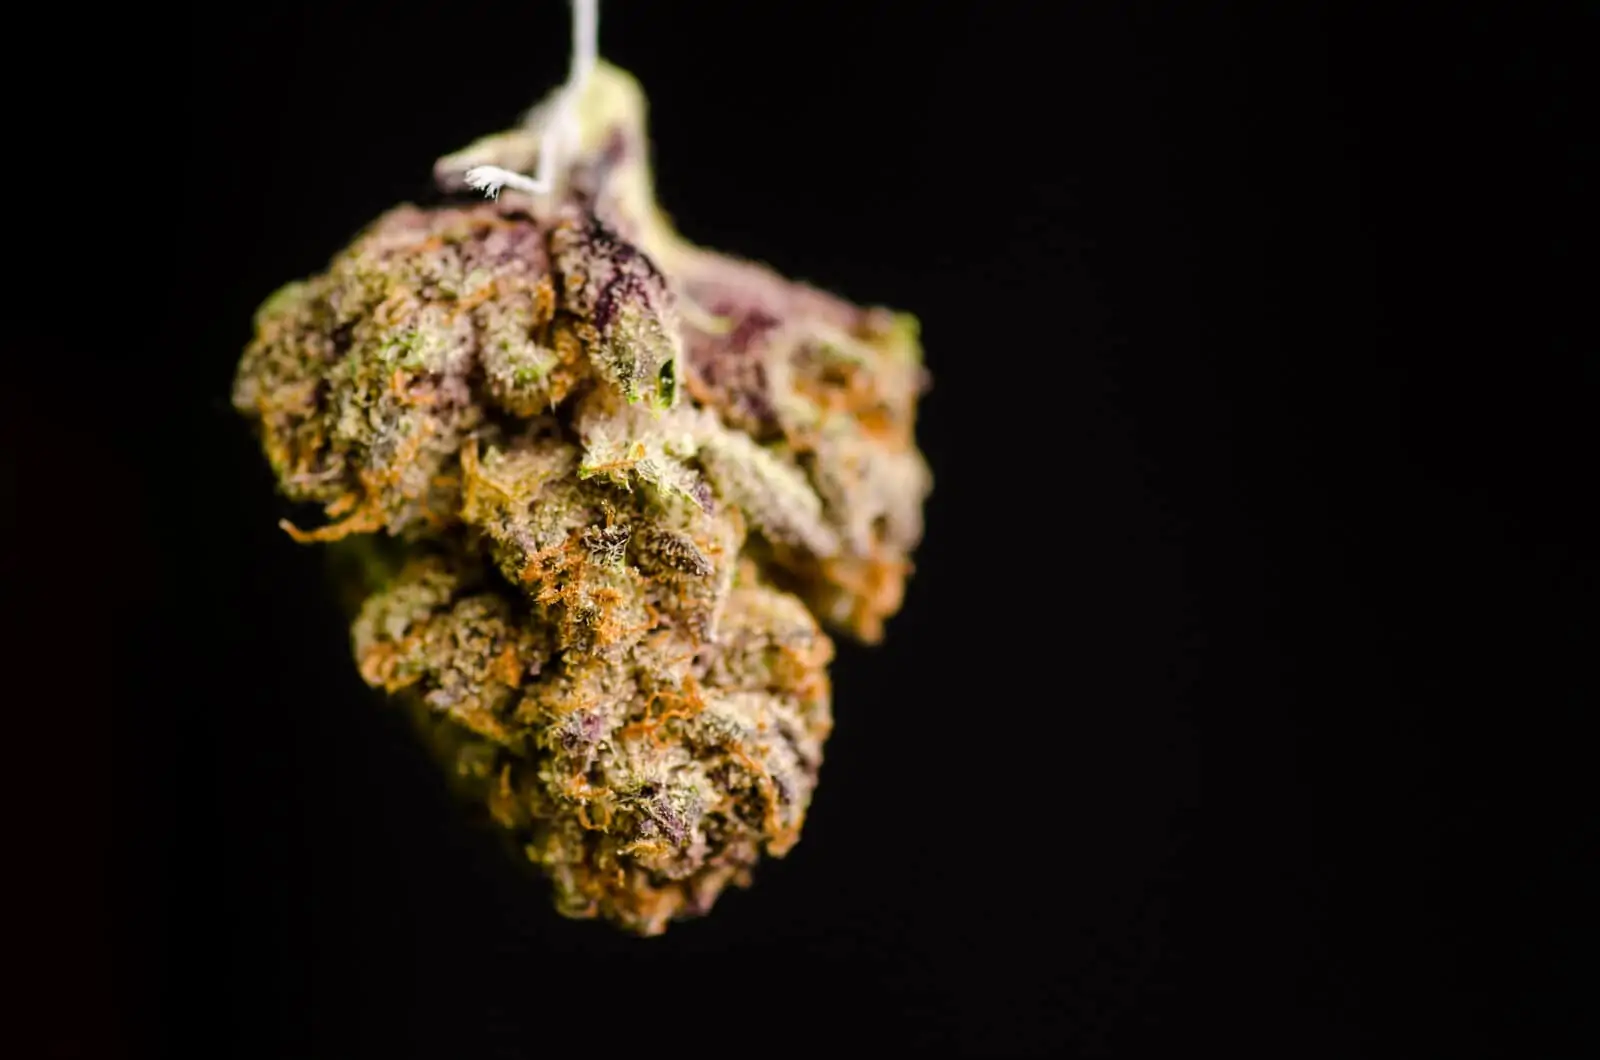 Candyland Weed Strain Review & Information